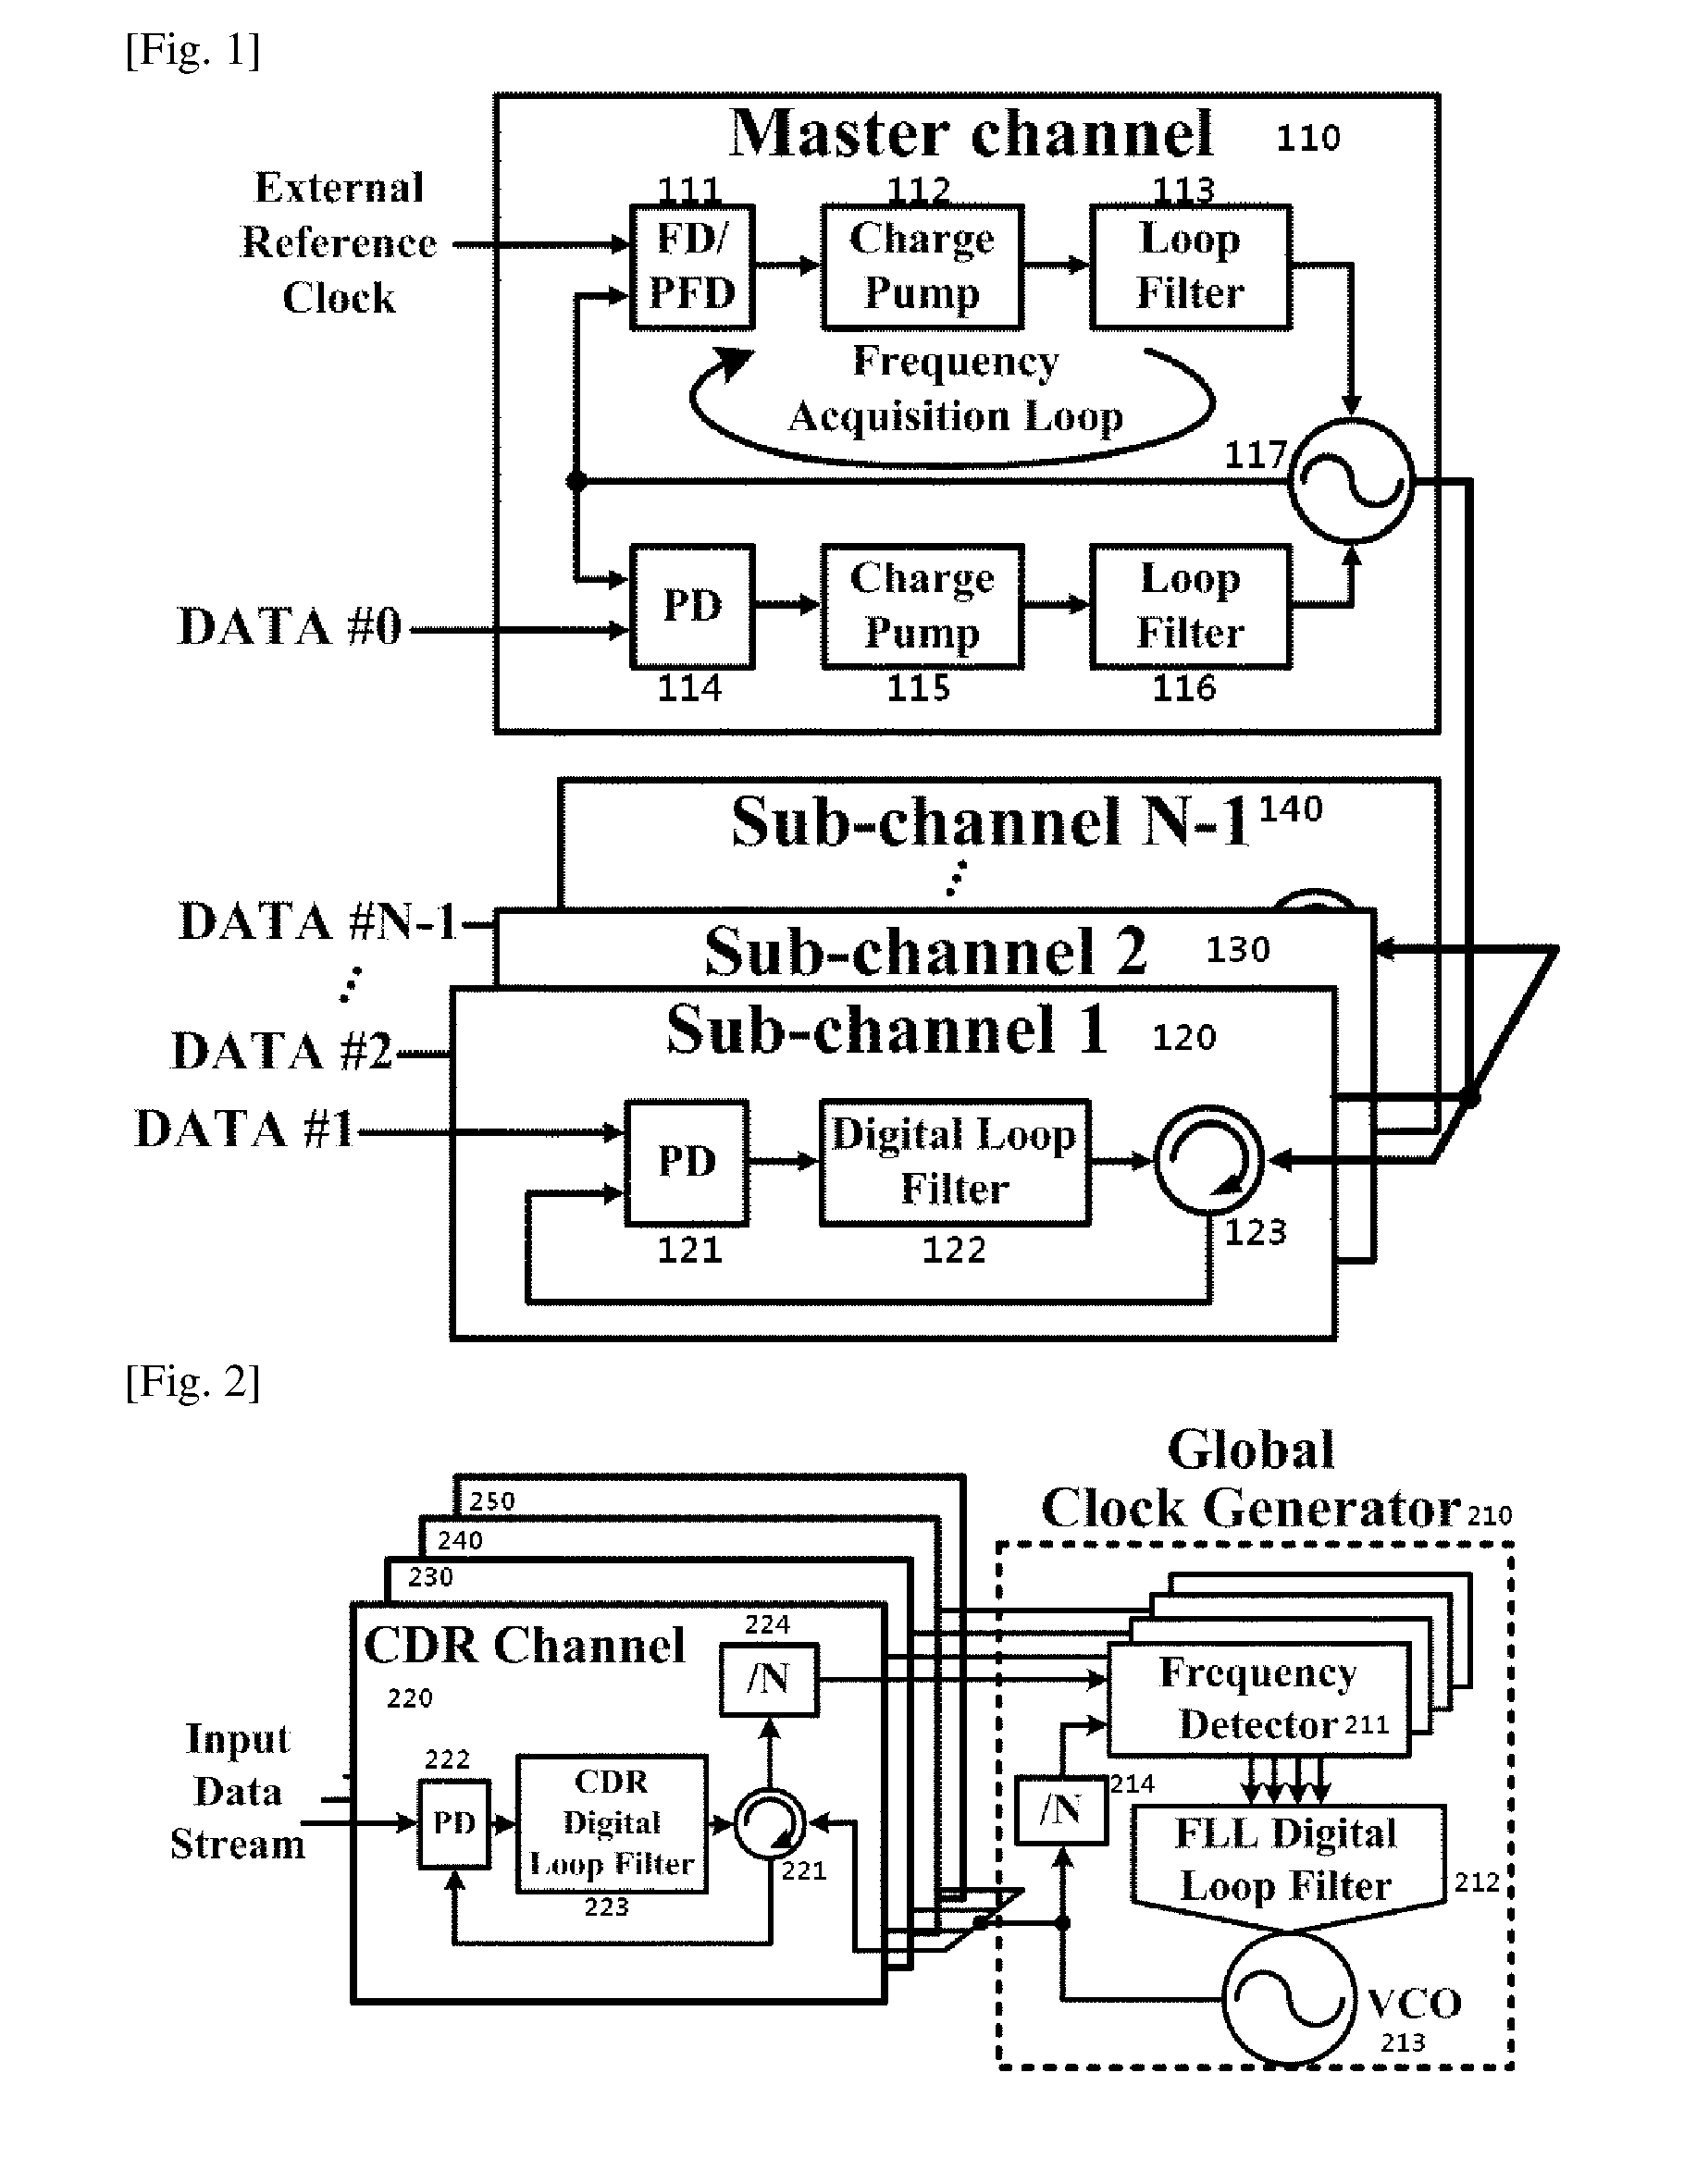 Referenceless and masterless global clock generator with a phase rotator-based parallel clock data recovery